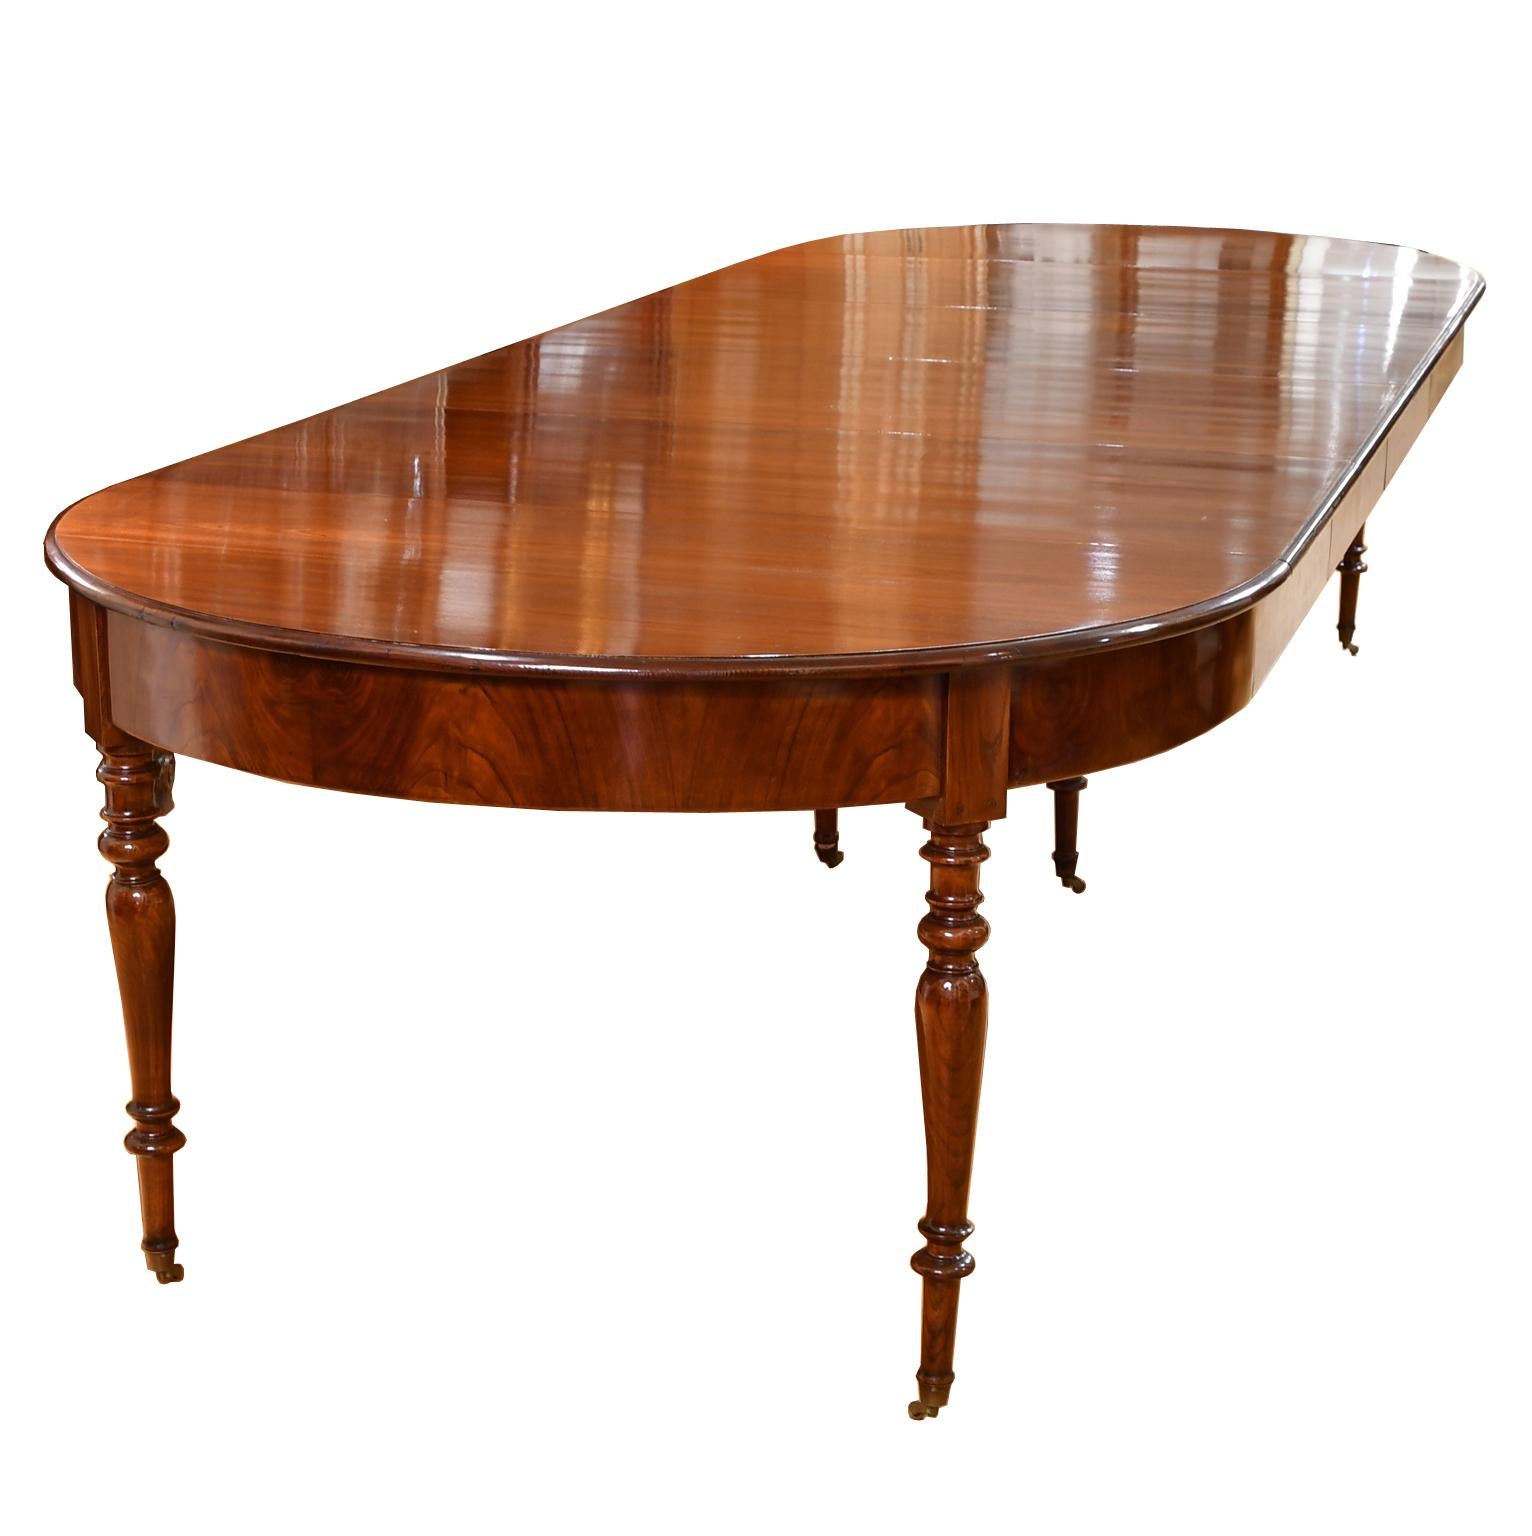 Hand-Crafted Antique 12 Foot Extension Dining Table in Mahogany w Racetrack Top & Four Leaves